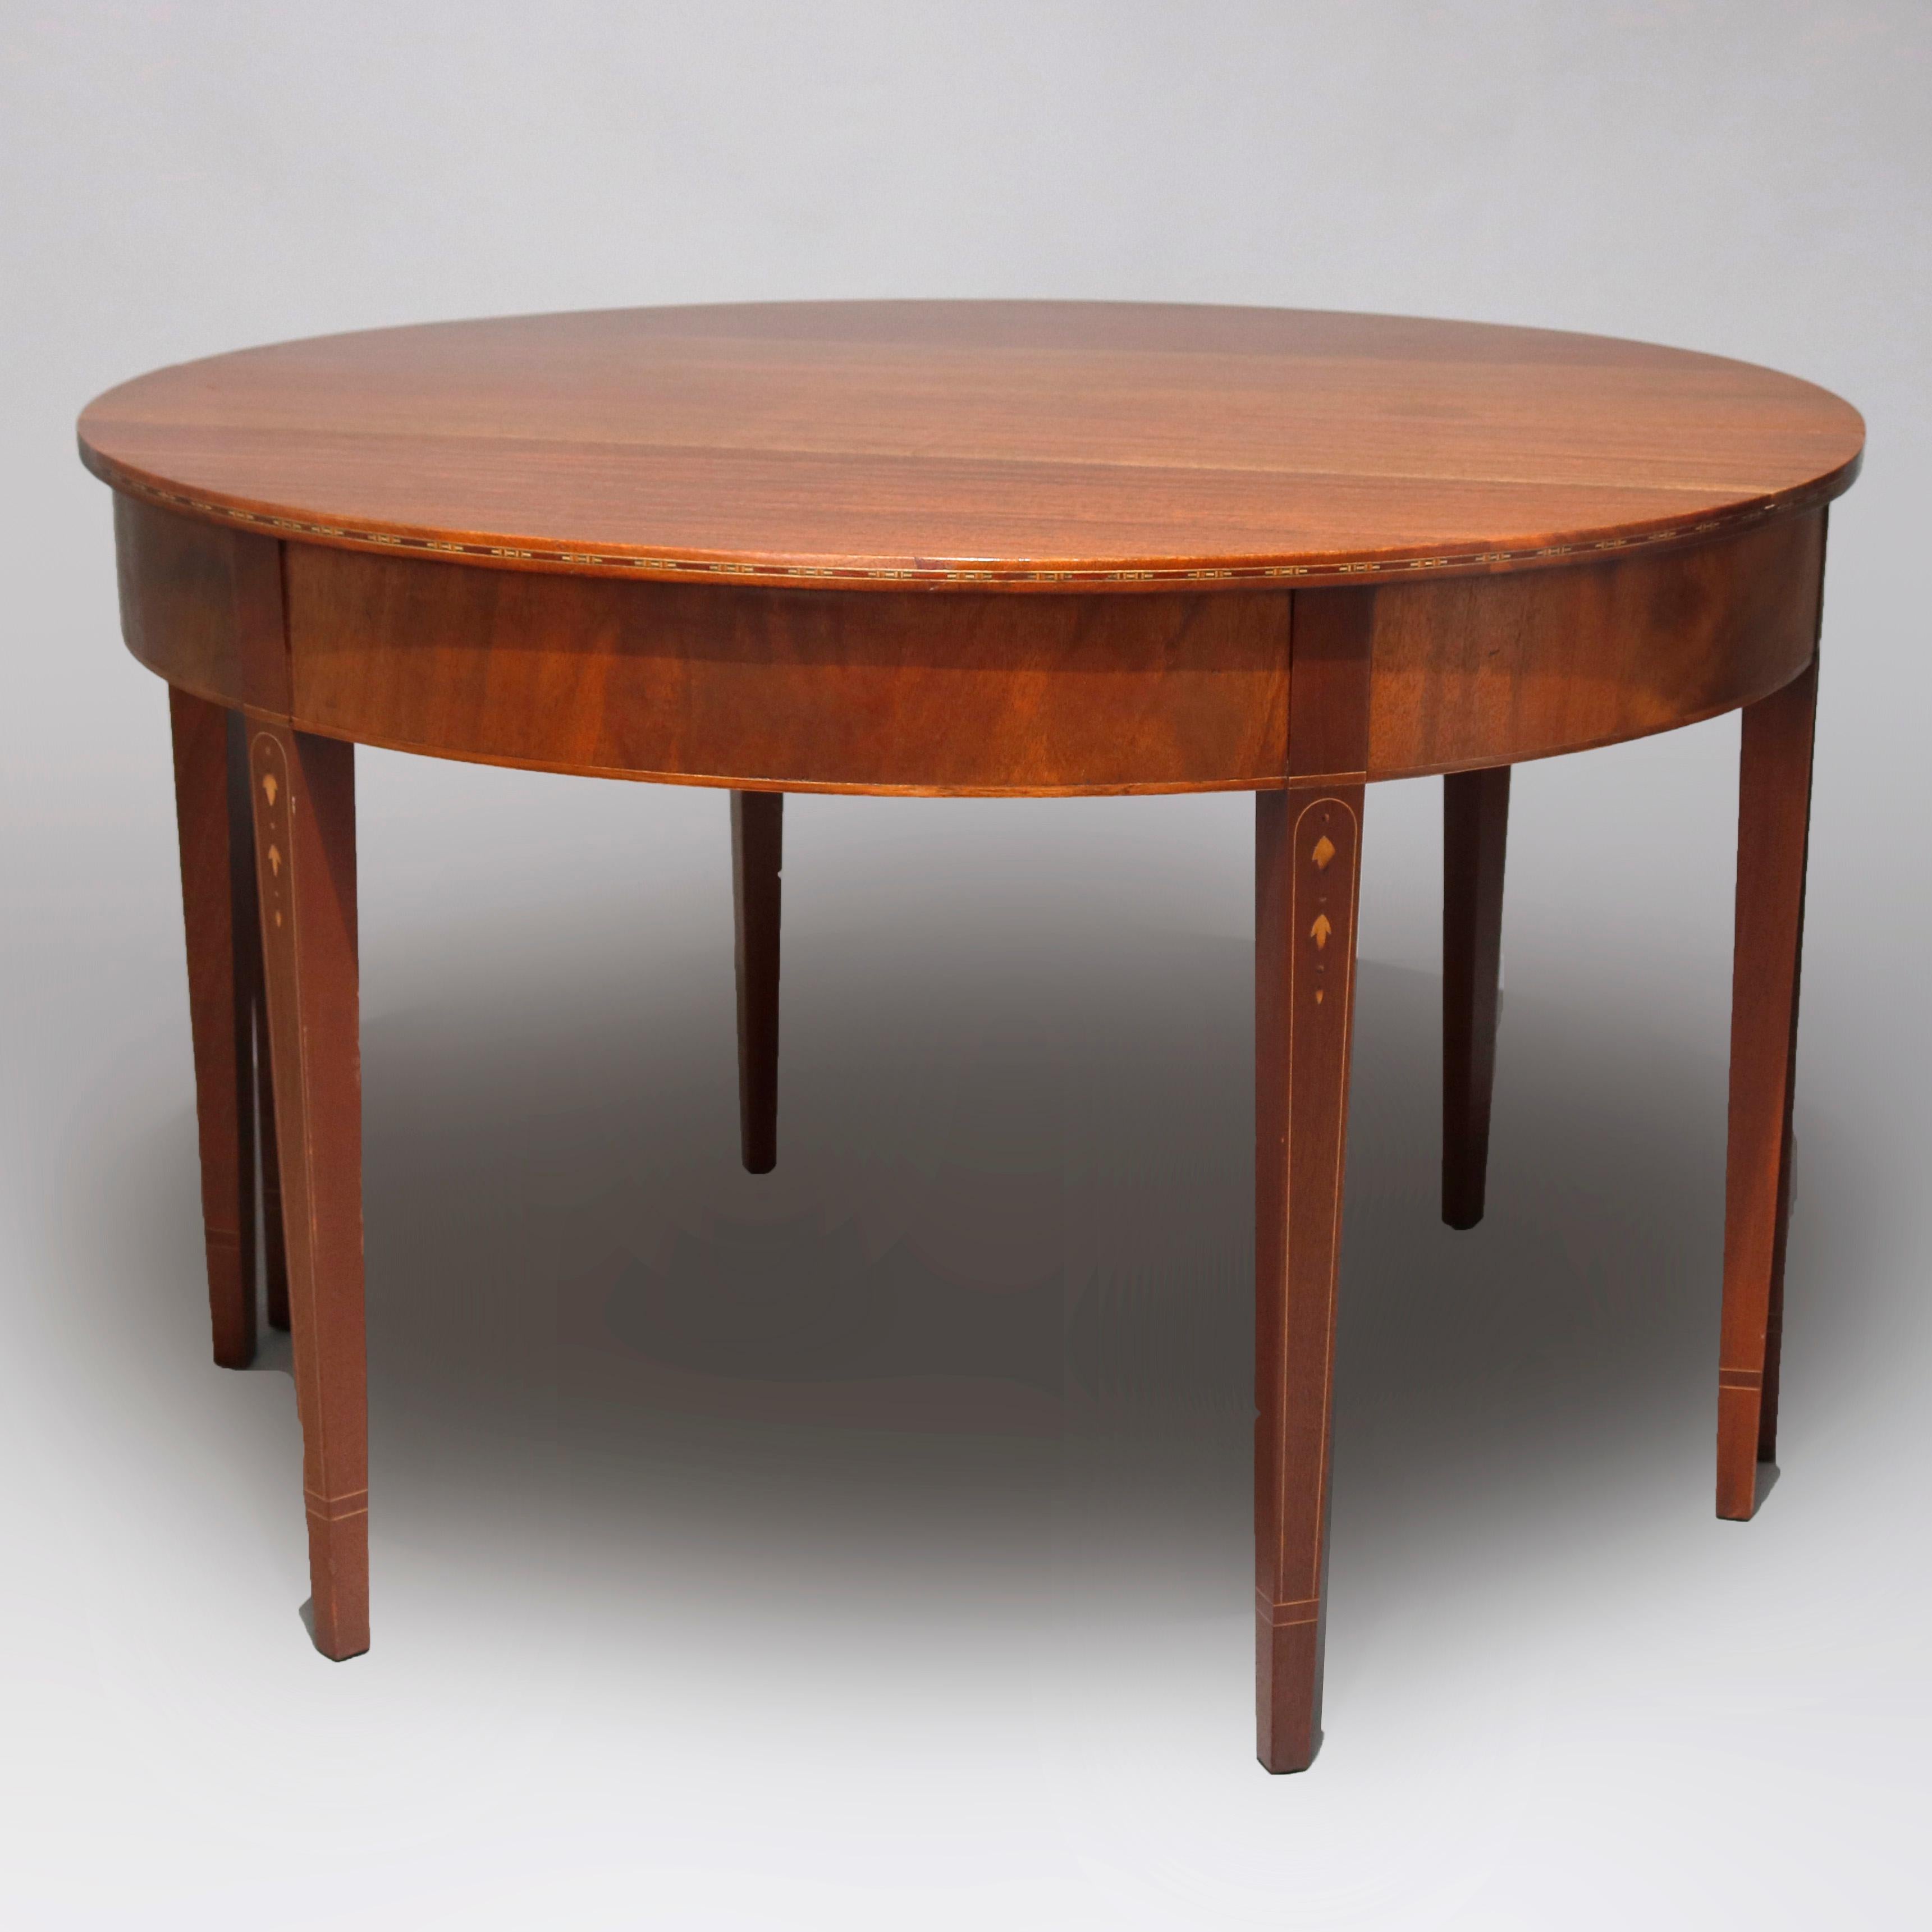 Inlay Antique Hepplewhite Satinwood Banded and Bellflower Mahogany Banquet Table